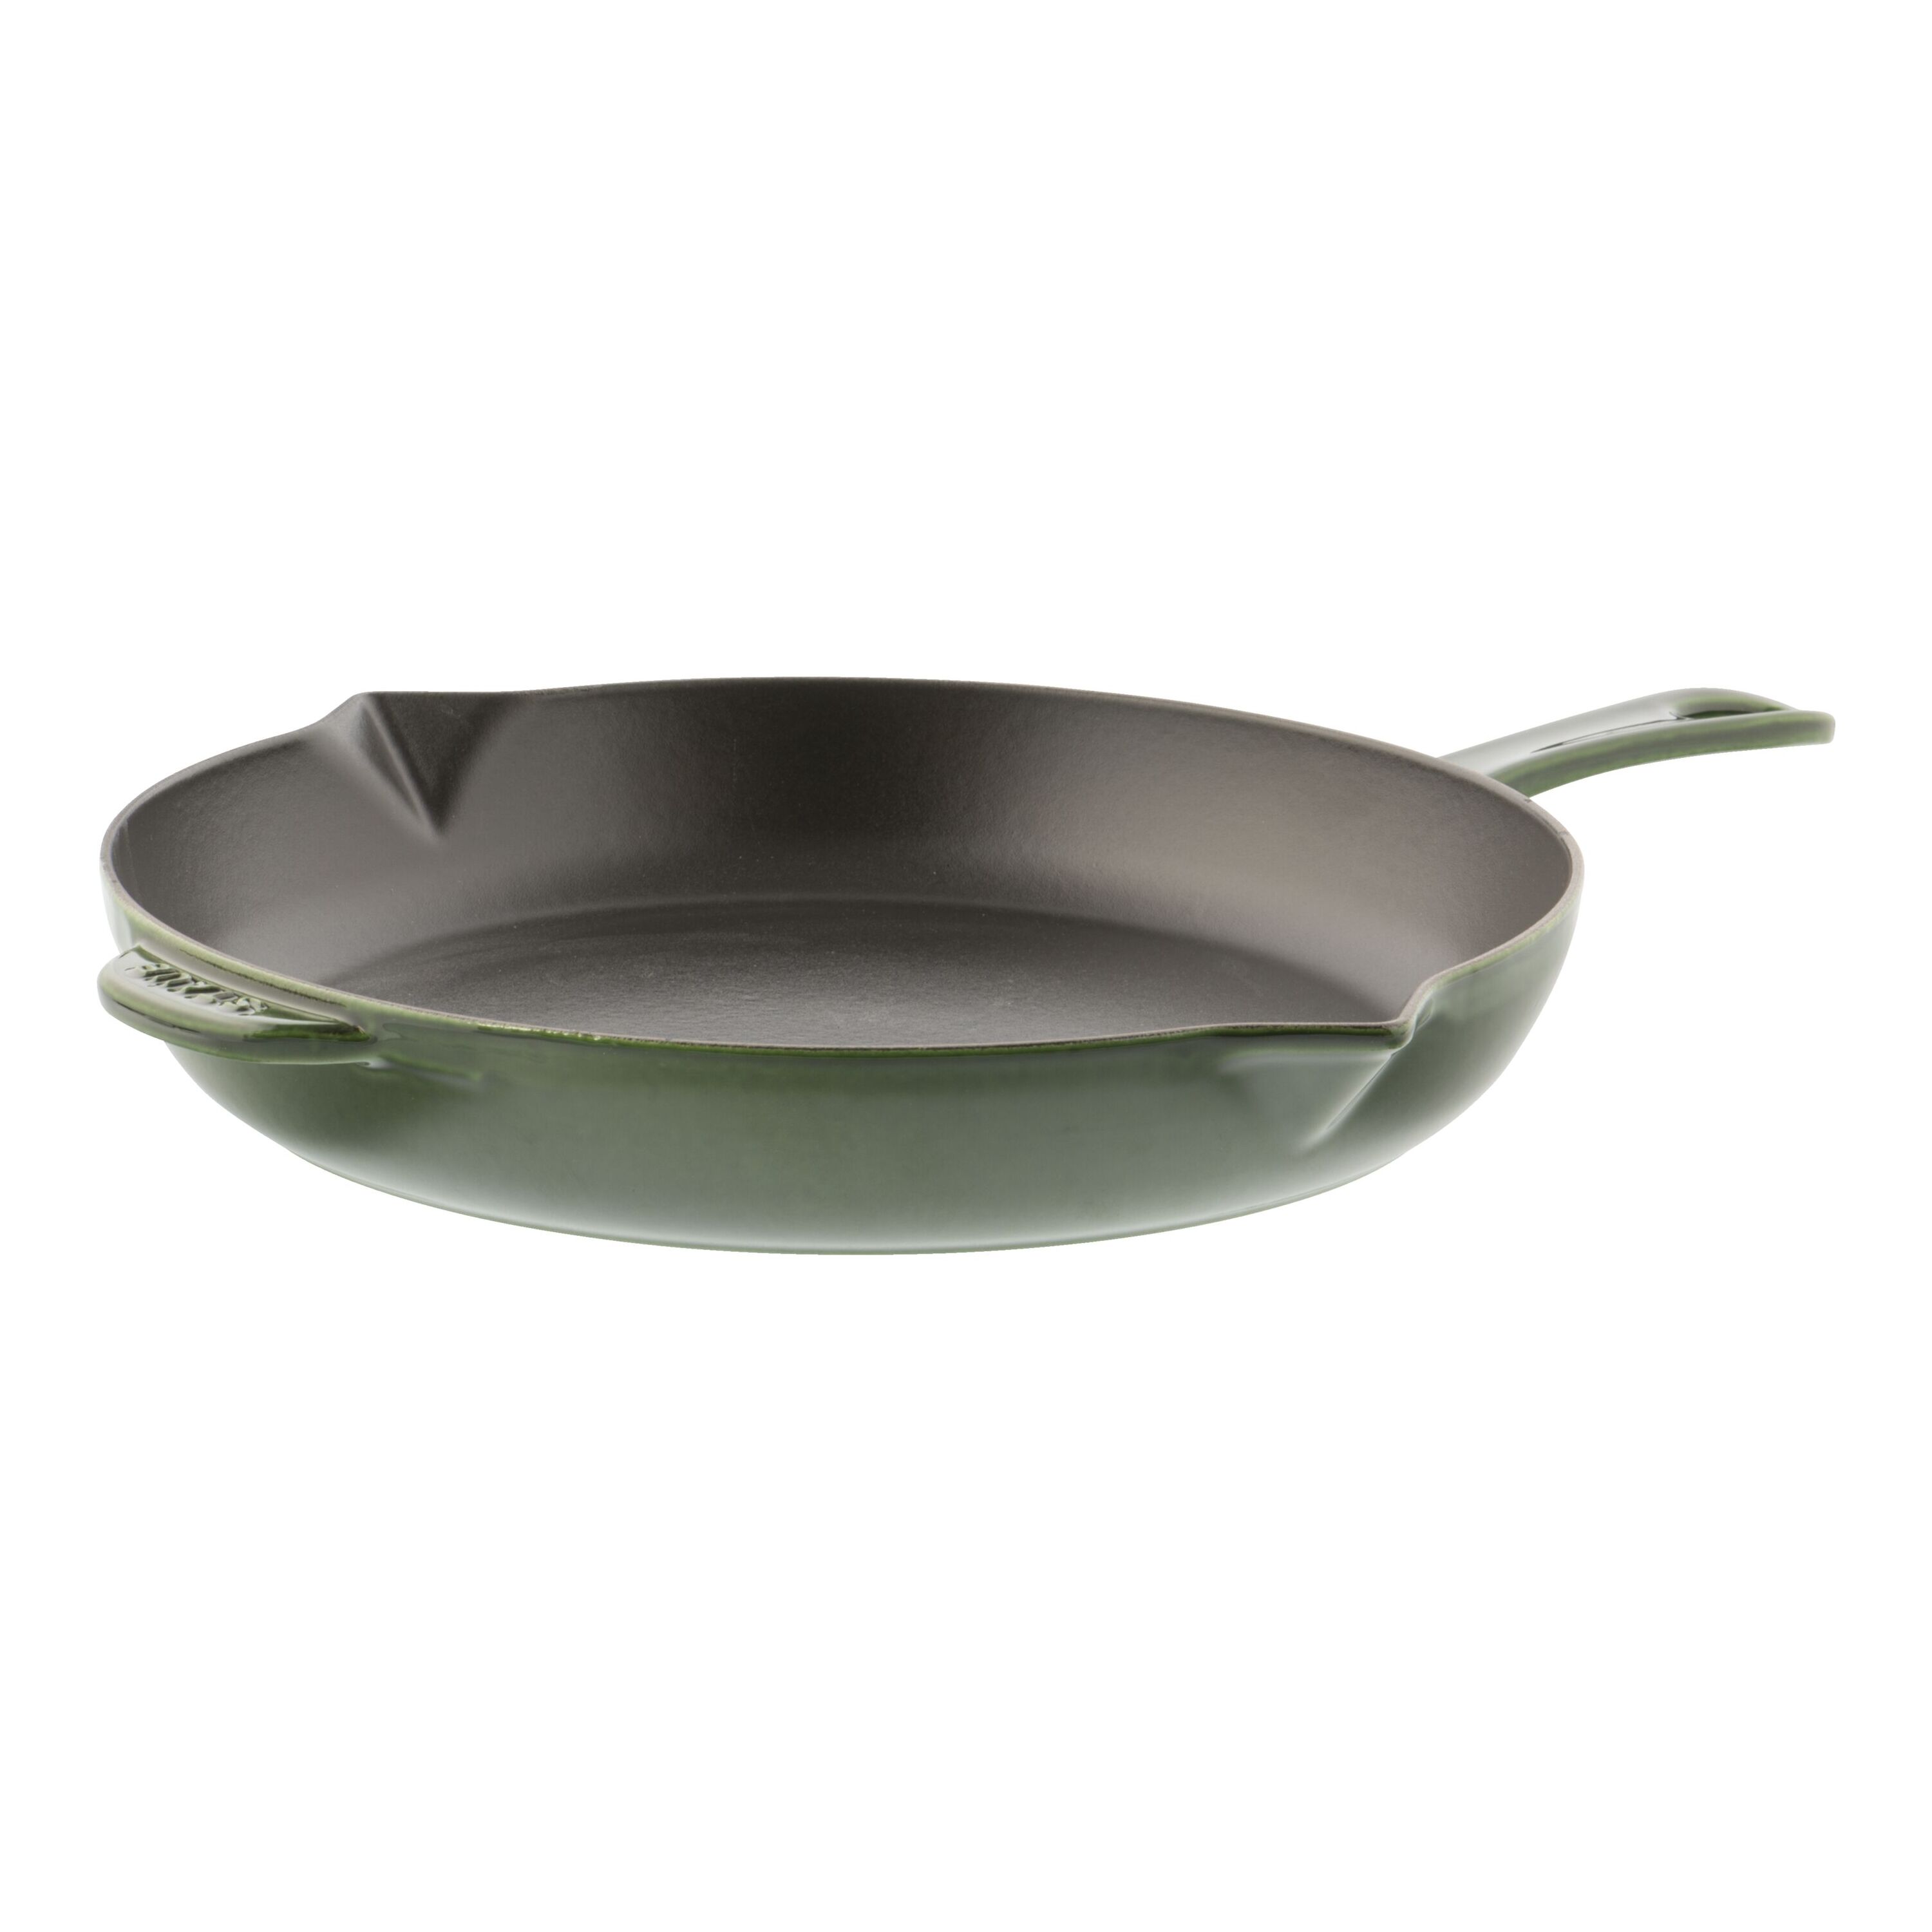 FBA_C12612 Cuisinel Cast Iron Skillet - 12-Inch Frying Pan with